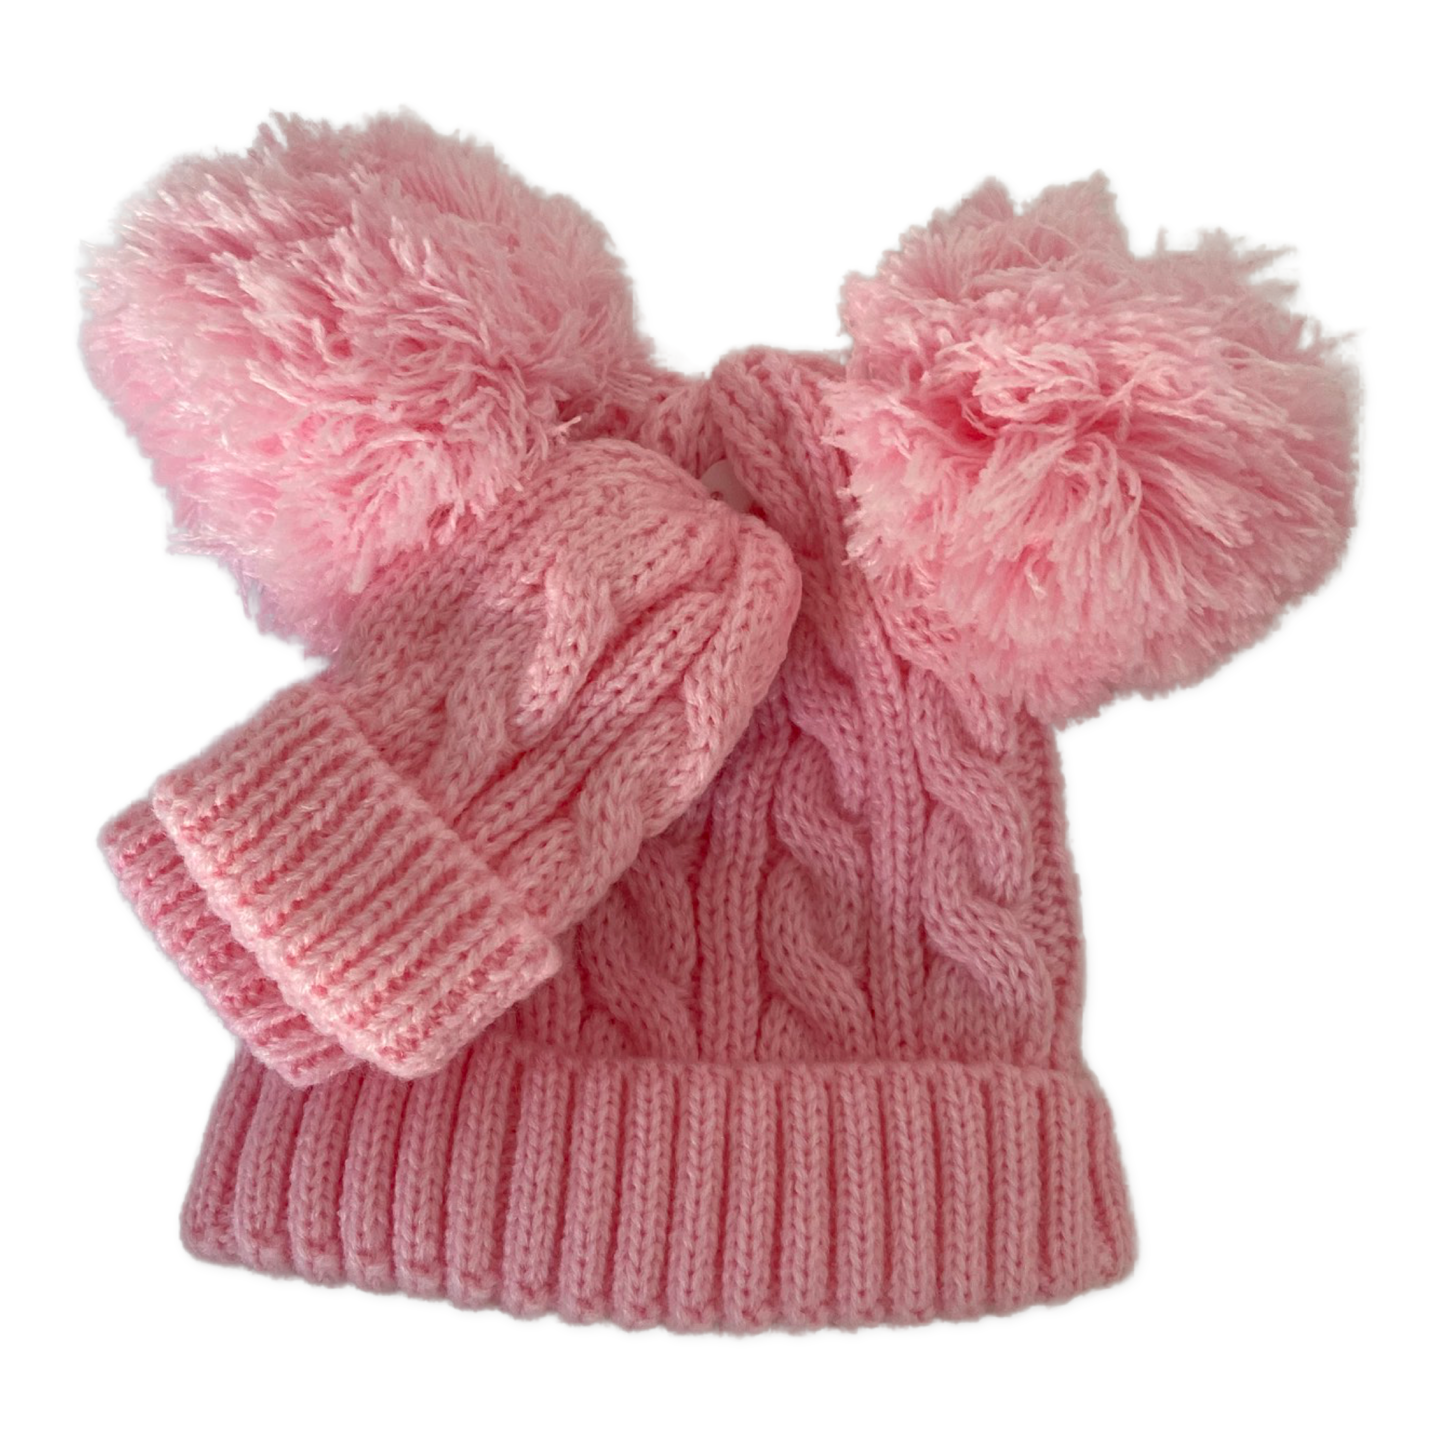 Double Pom Pom hat and mitts set